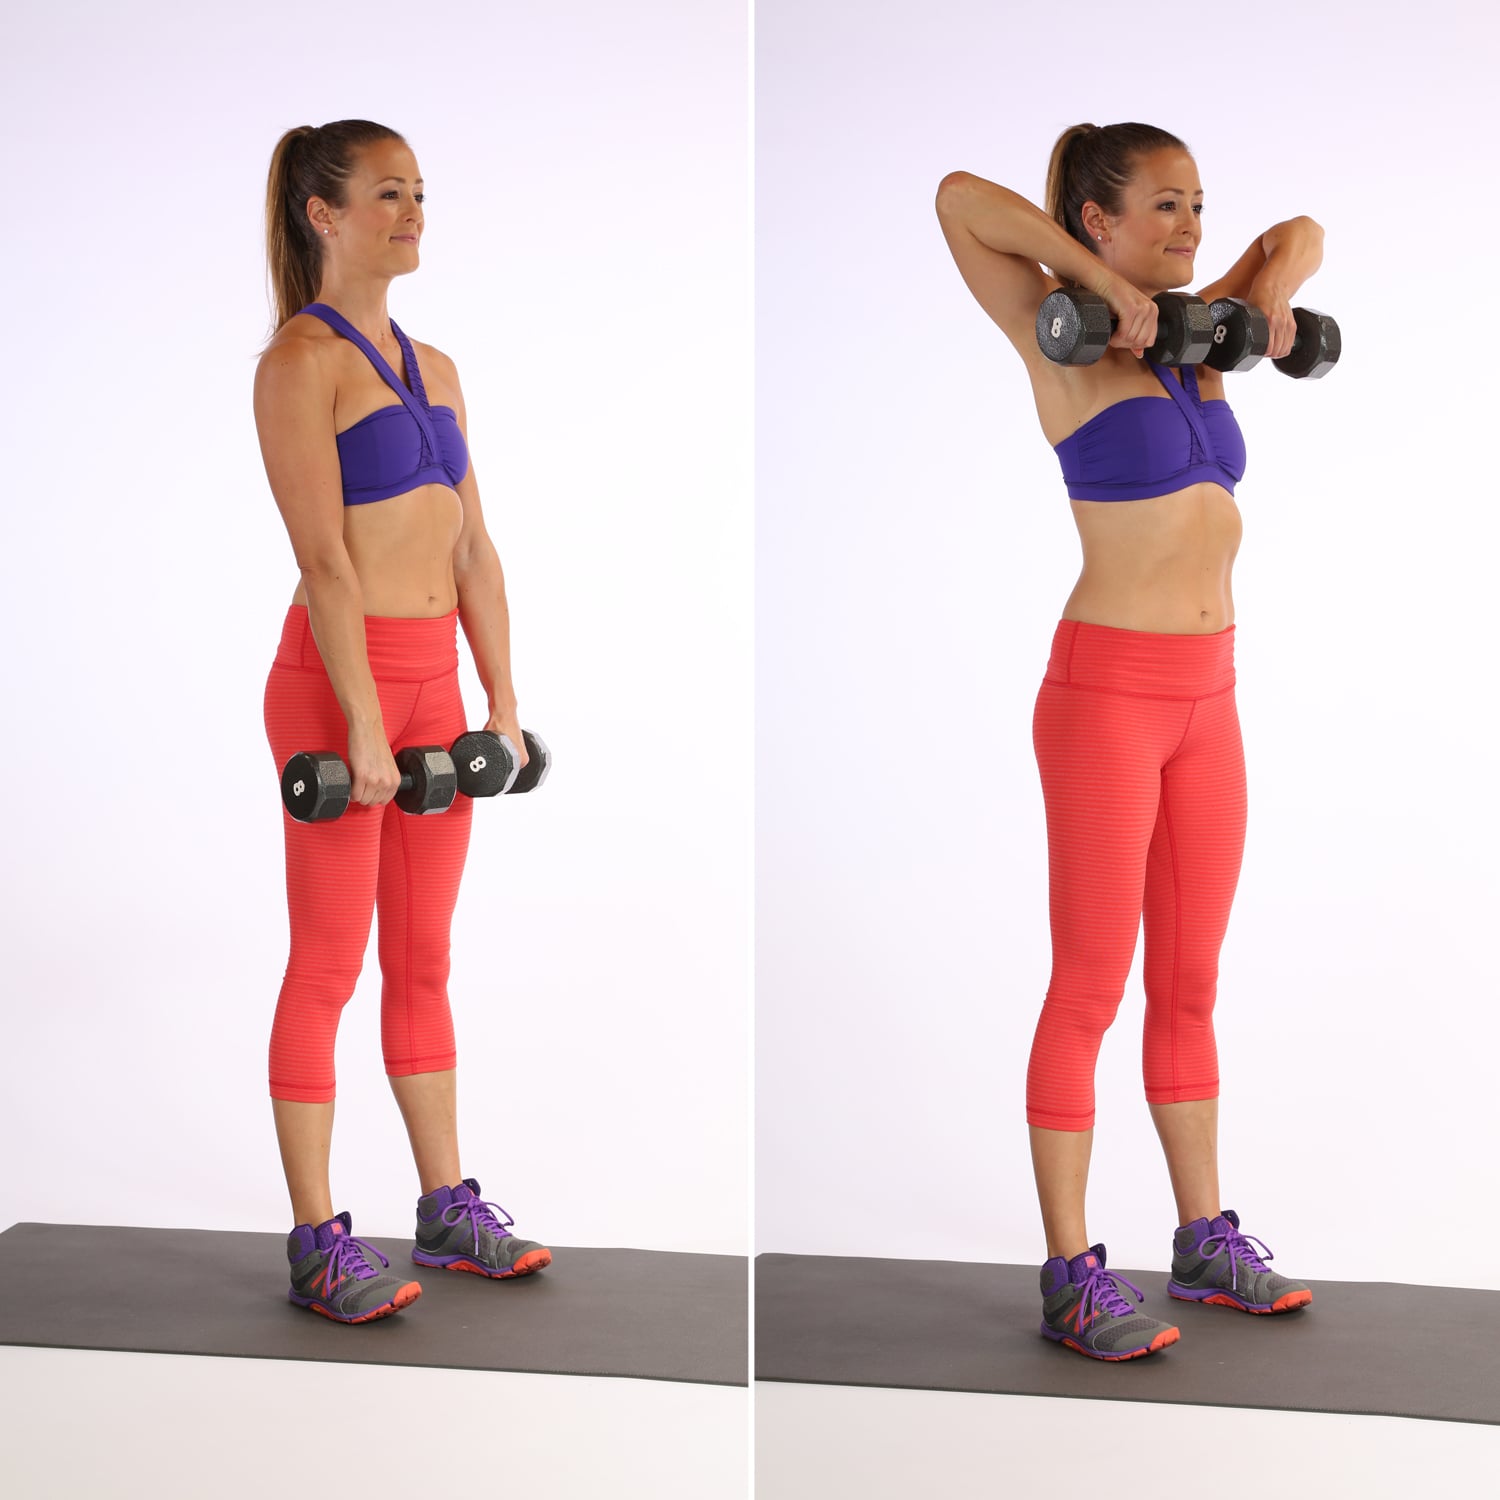 Build a Bigger Back and Supersize Your Arms with Two Dumbbells